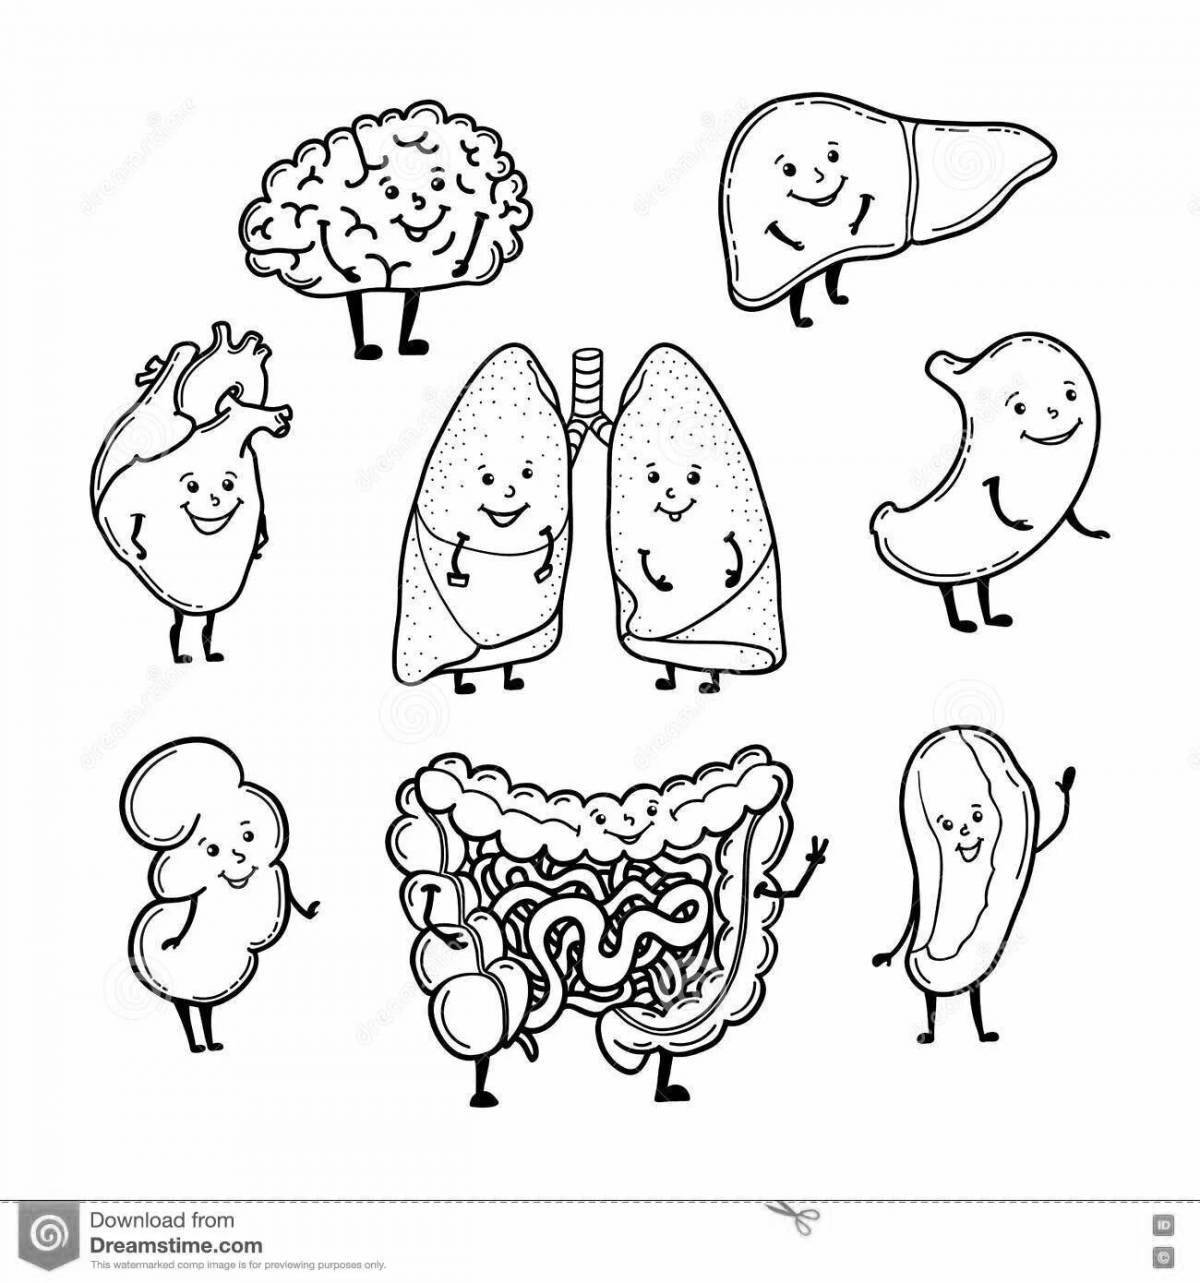 Adorable coloring book of the human body with internal organs